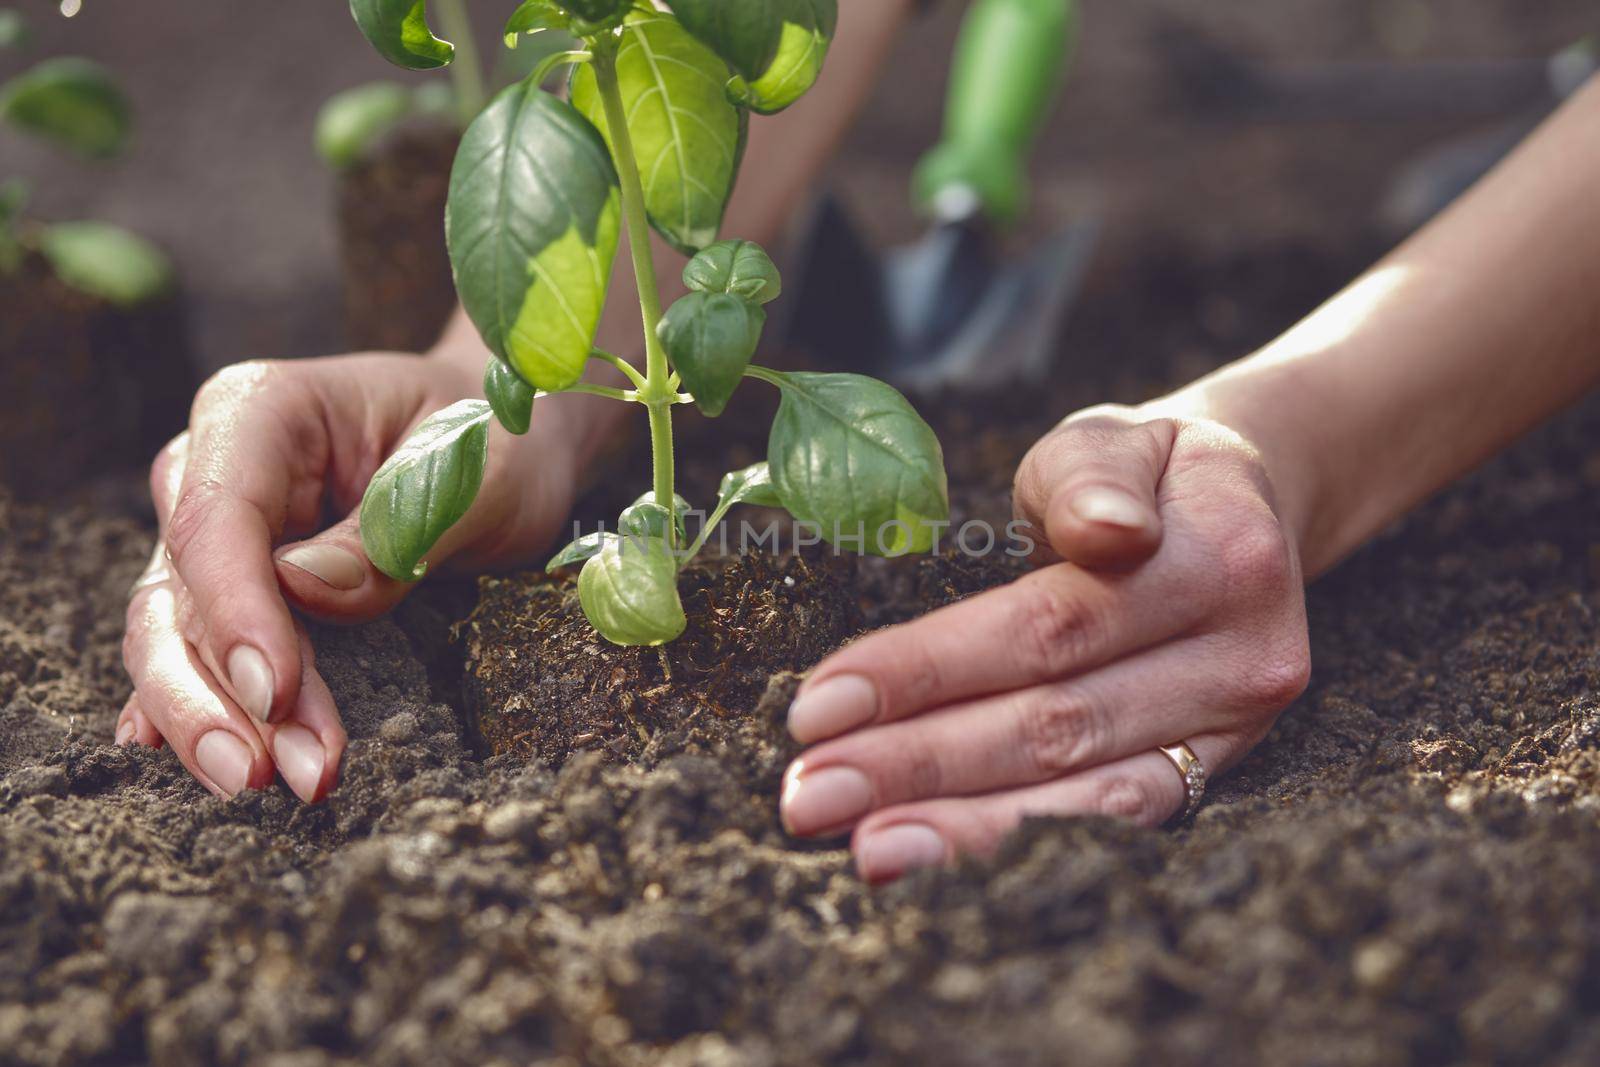 Hands of unknown lady are planting young green basil sprout or plant in fertilized ground. Organic eco seedling. Gardening concept. Sunlight, soil, small garden shovel. Close-up